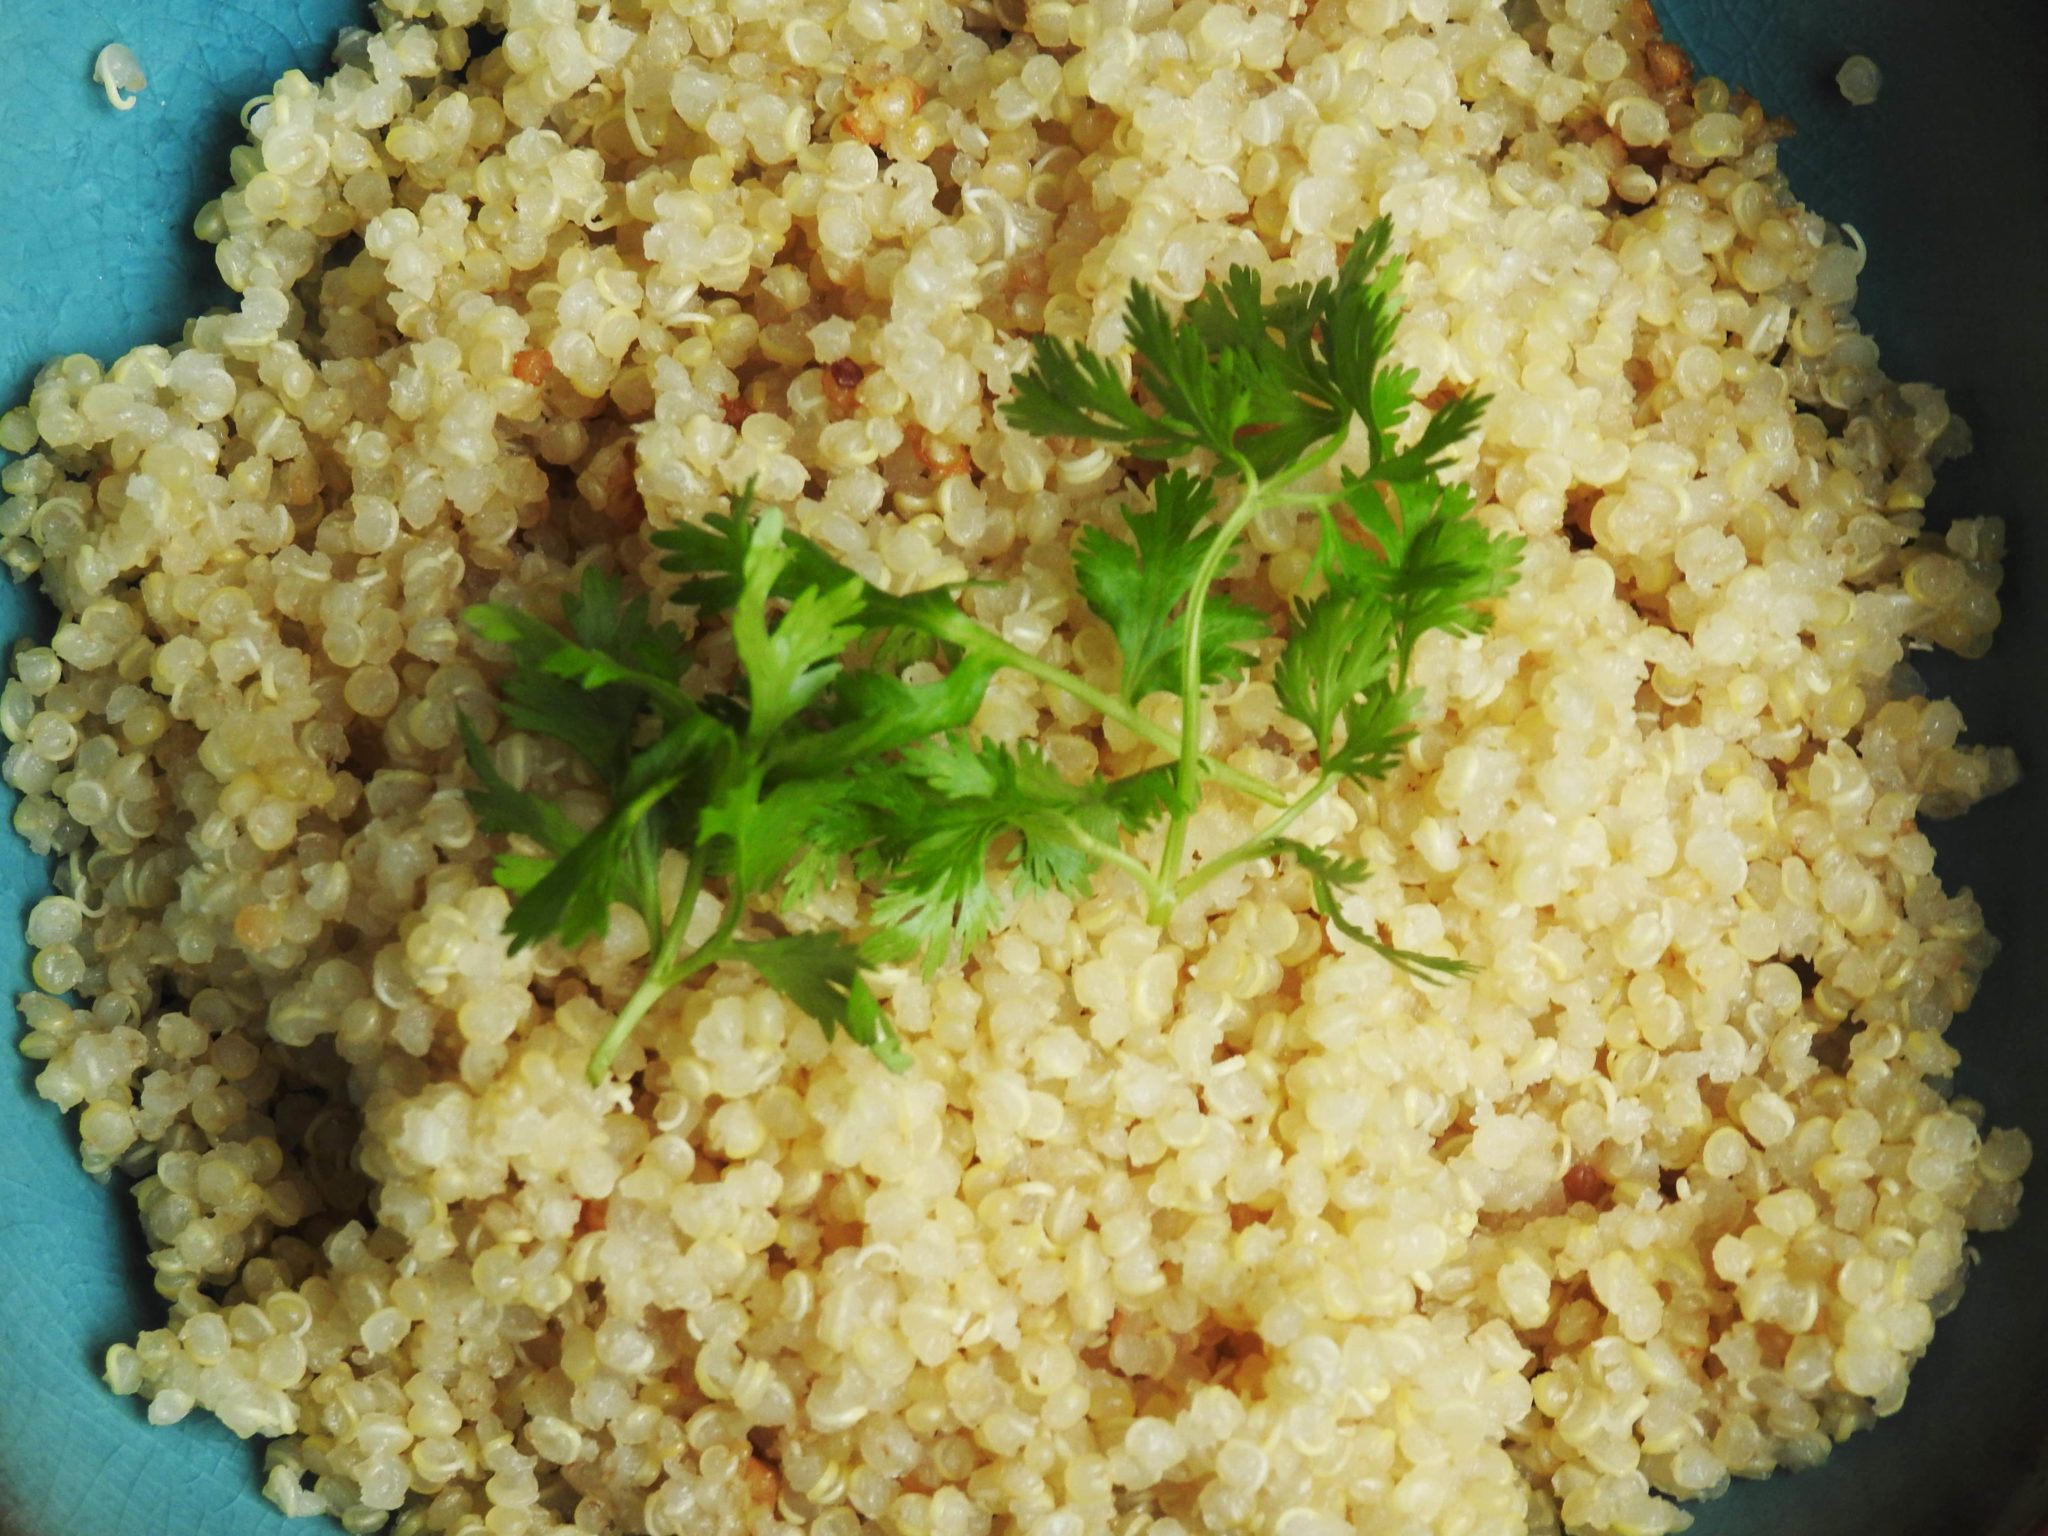 Quinoa cooked with Lemongrass and Coconut milk